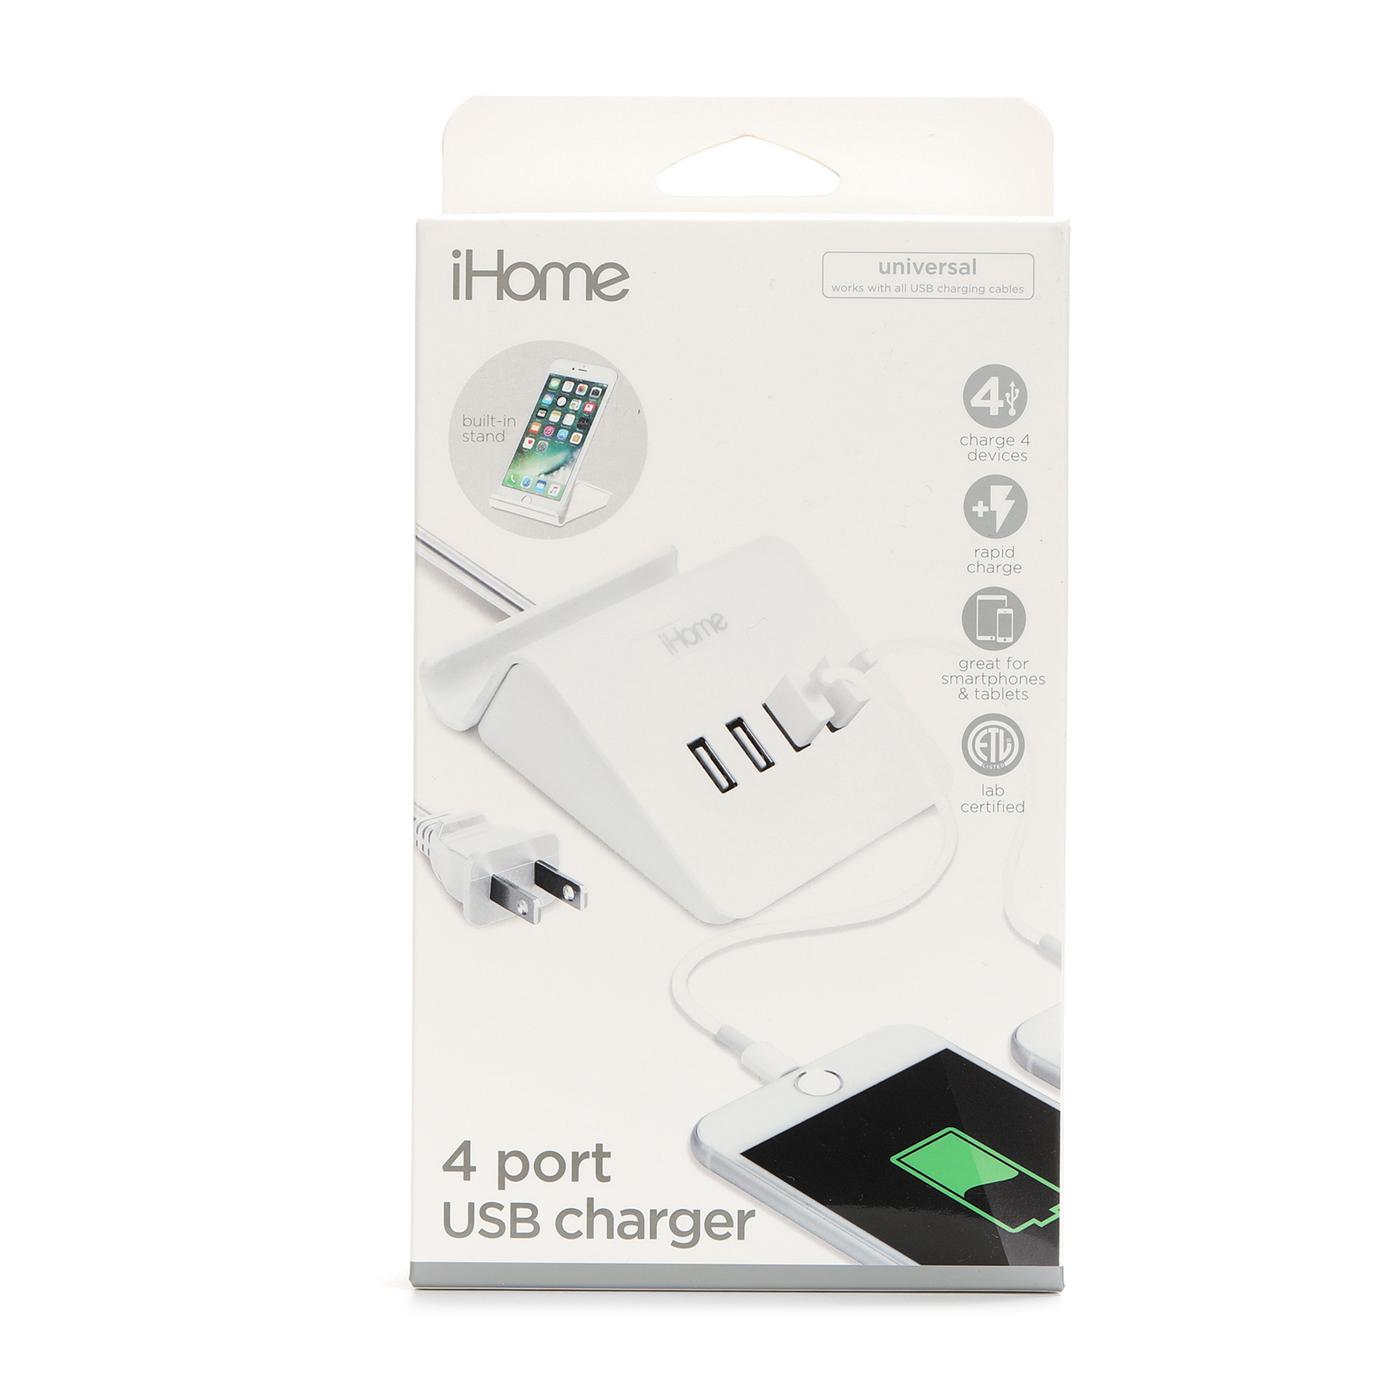 iHome 4-Port USB Charging Stand - White; image 1 of 2